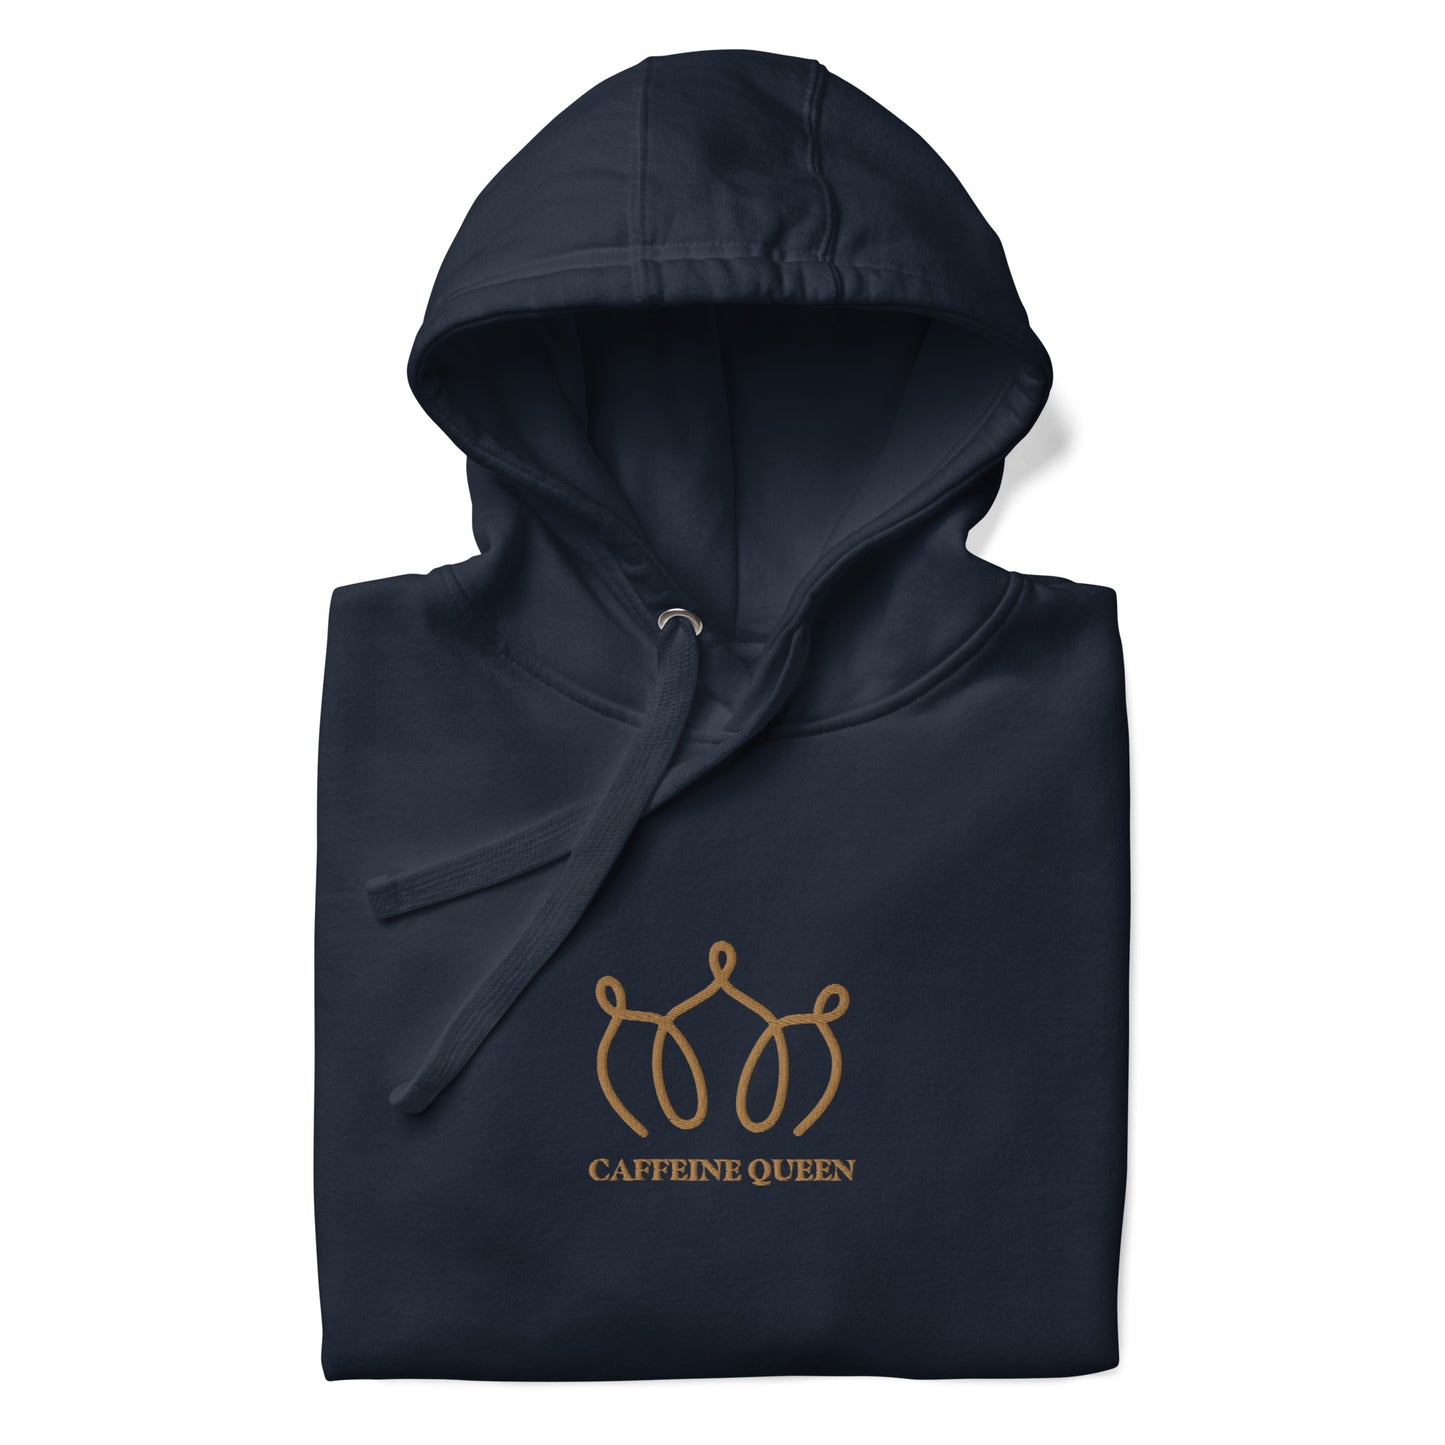 Close up of a folded navy blazer hoodie with an embroidered crown and Caffeine Queen text on the front.